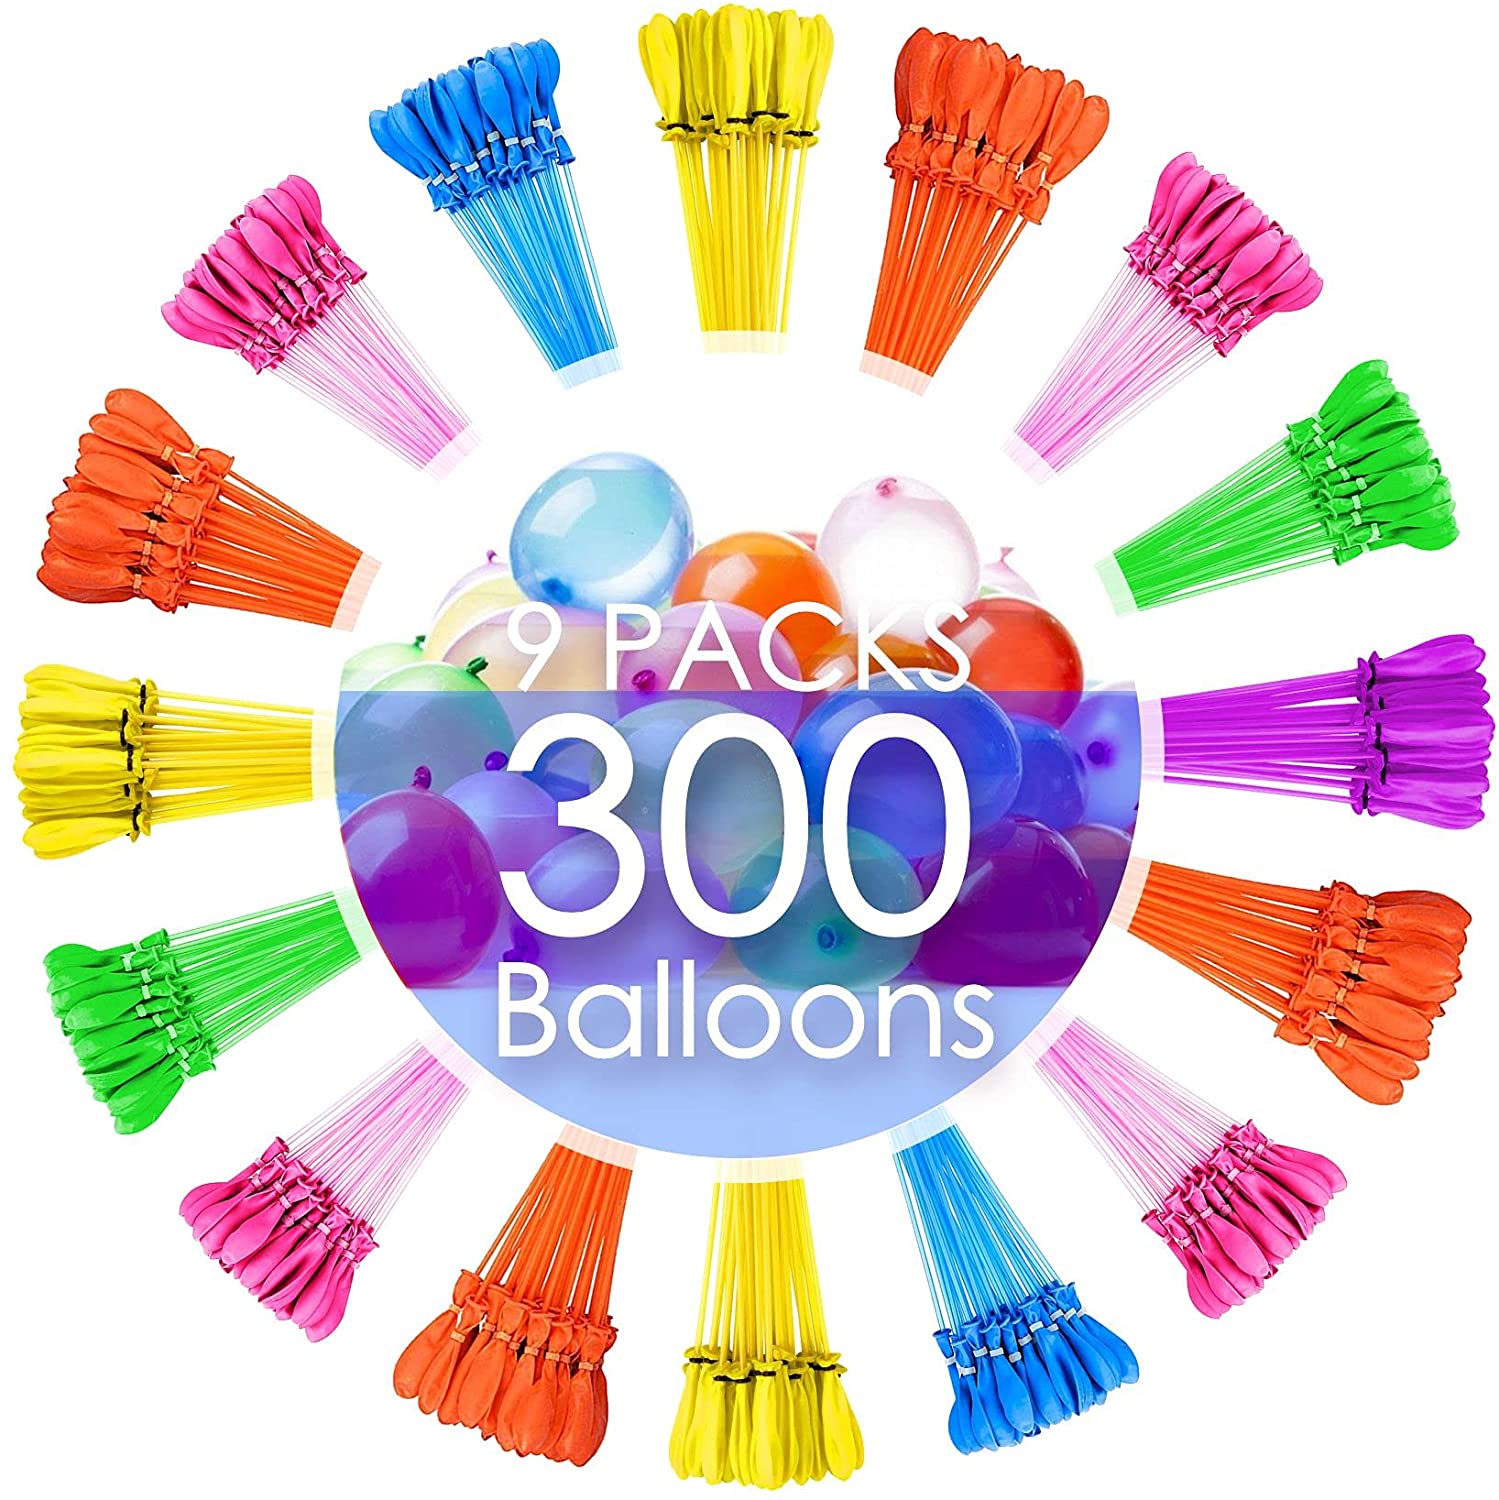 FEECHAGIER Water Balloons for Kids Girls Boys Balloons Set Party Games Quick Fill 660 Balloons for Swimming Pool Outdoor Summer Funs PO49